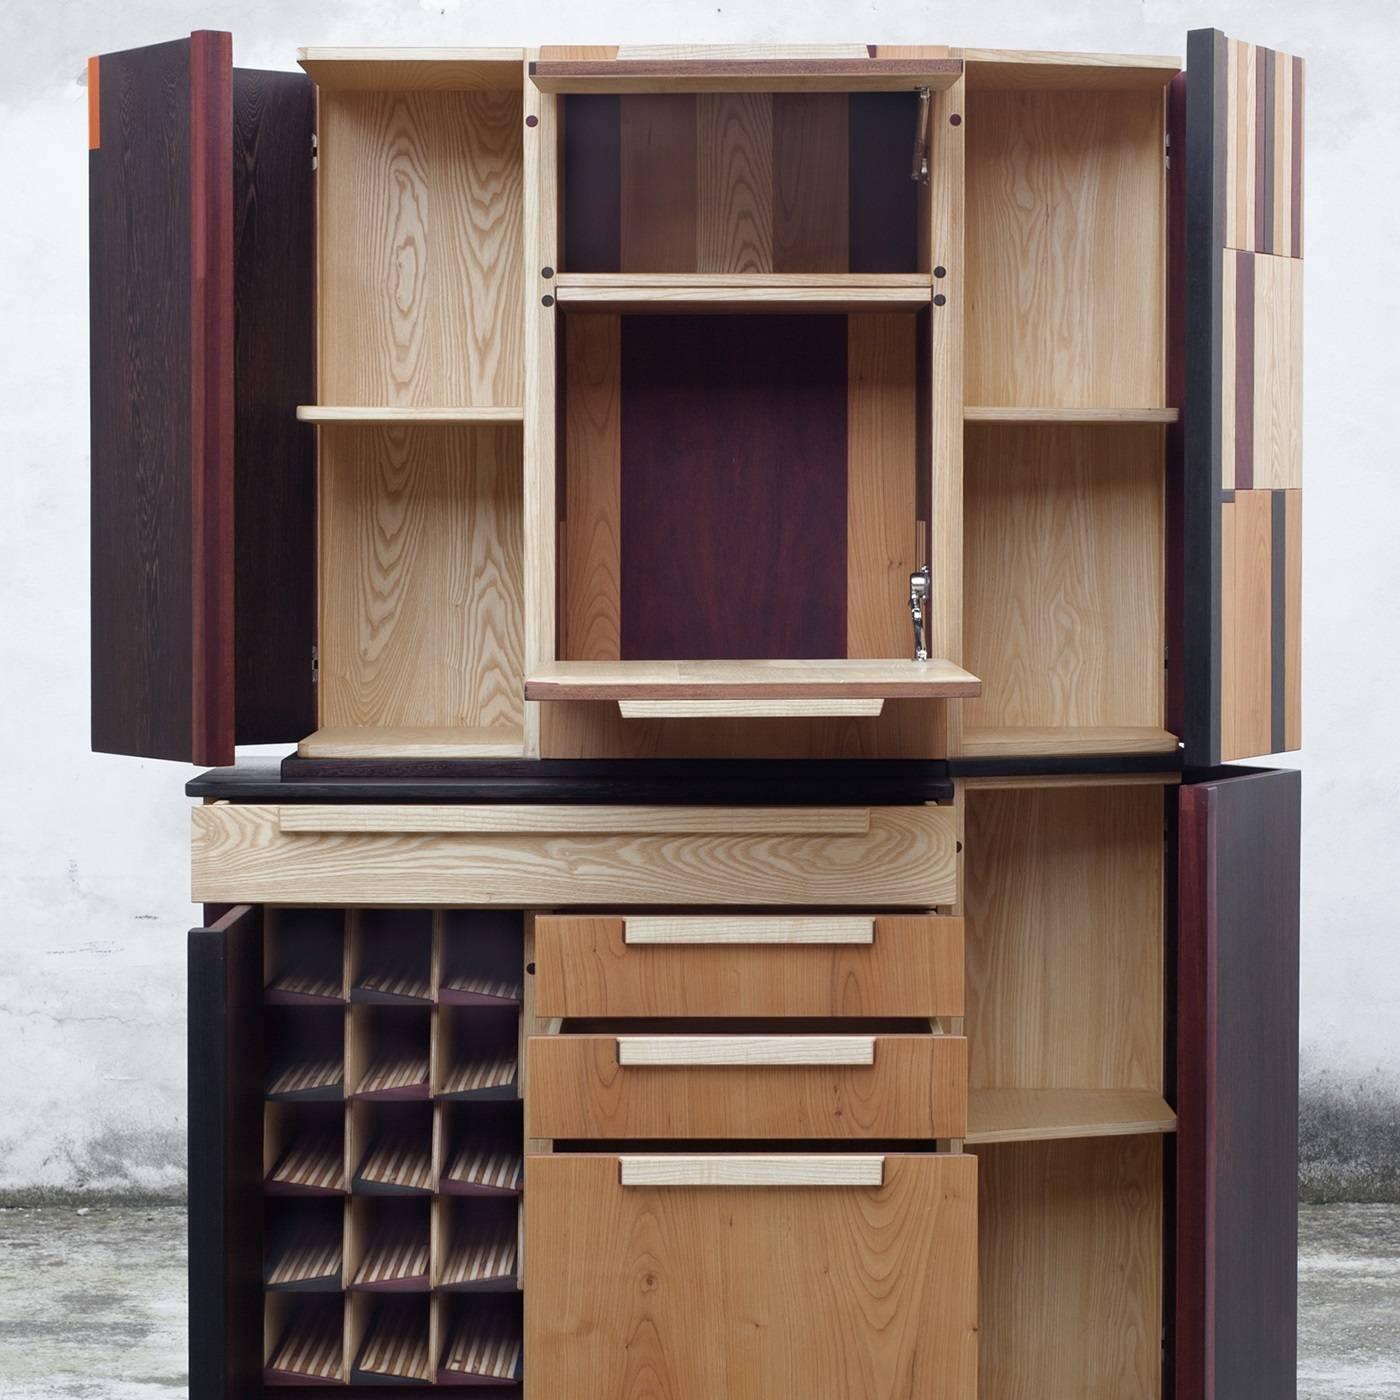 This TOTEM is a piece of functional design, thanks to its many spaces that can contain a variety of objects. Inside, there are six compartments for glasses, a cart for liqueurs, a bottle-rack, and two drawers: one for silverware, the other for